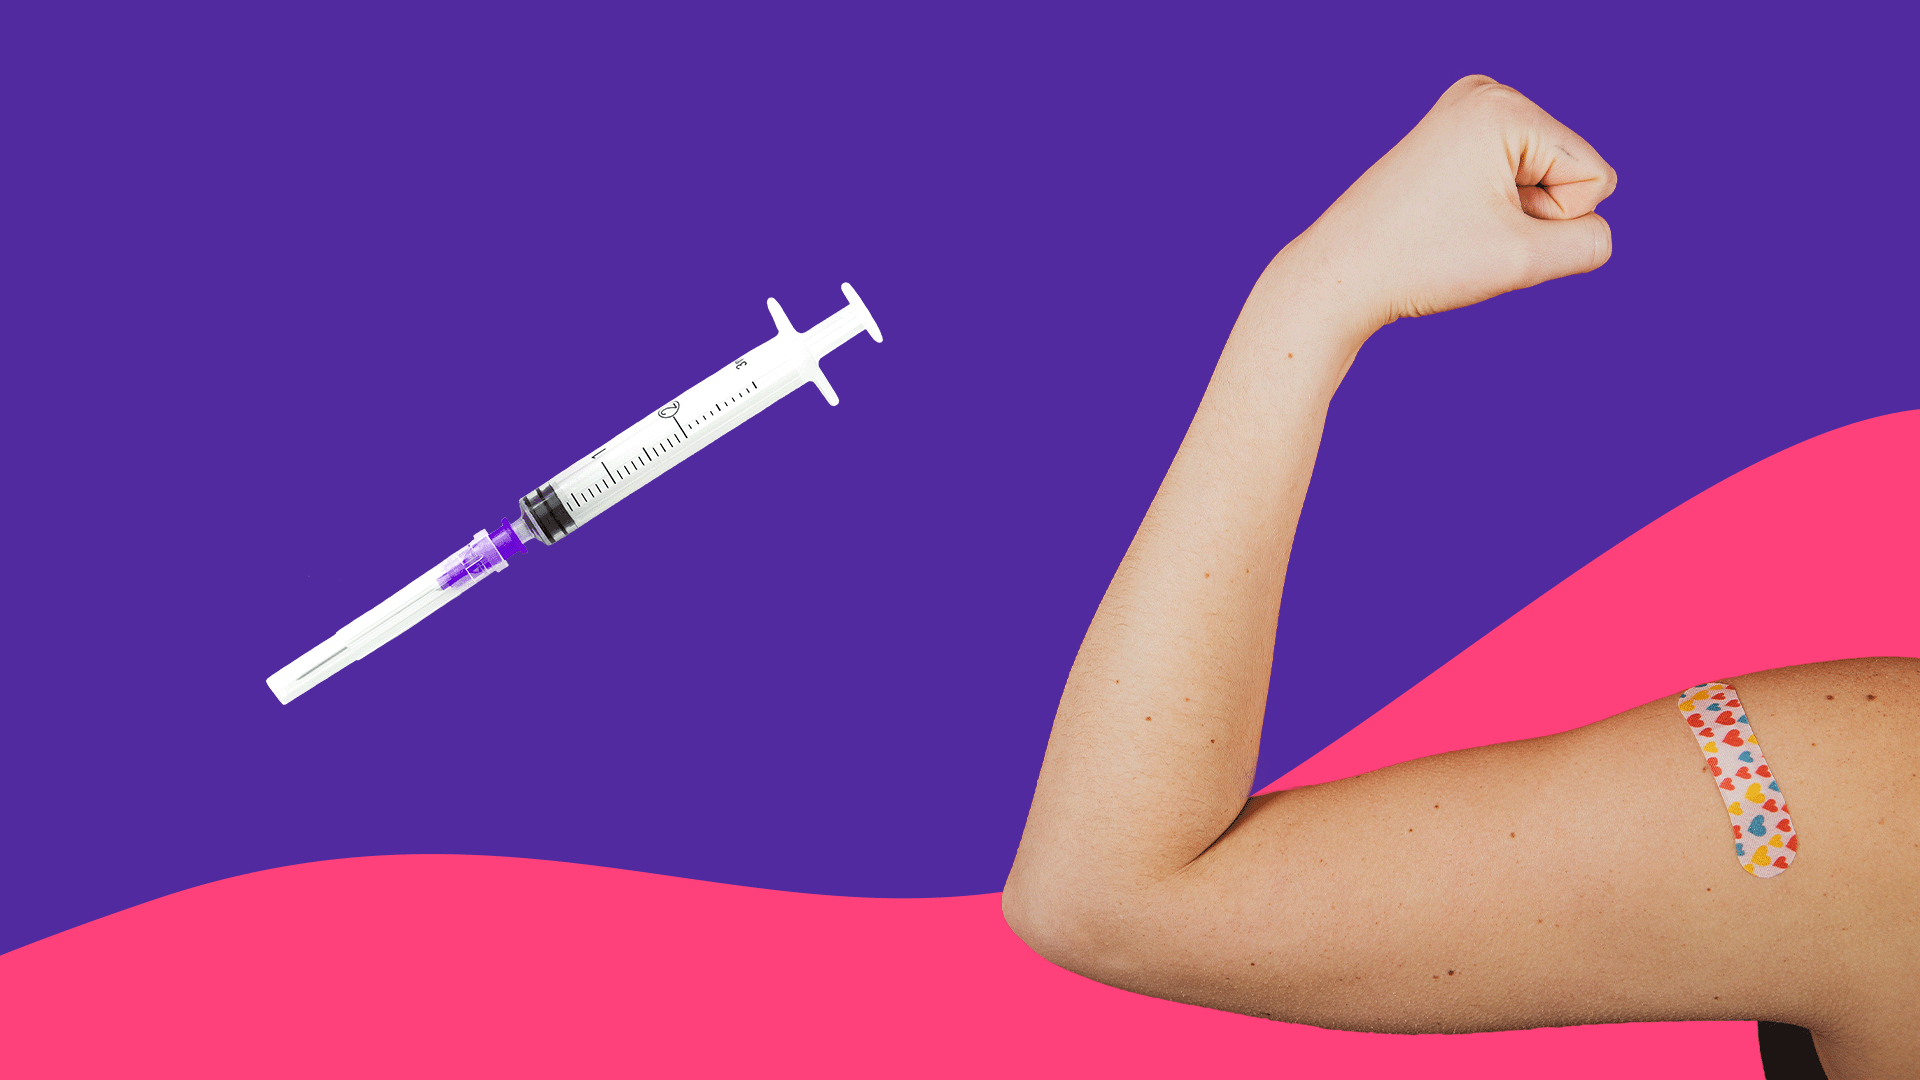 An arm with shots — sore arm after vaccine